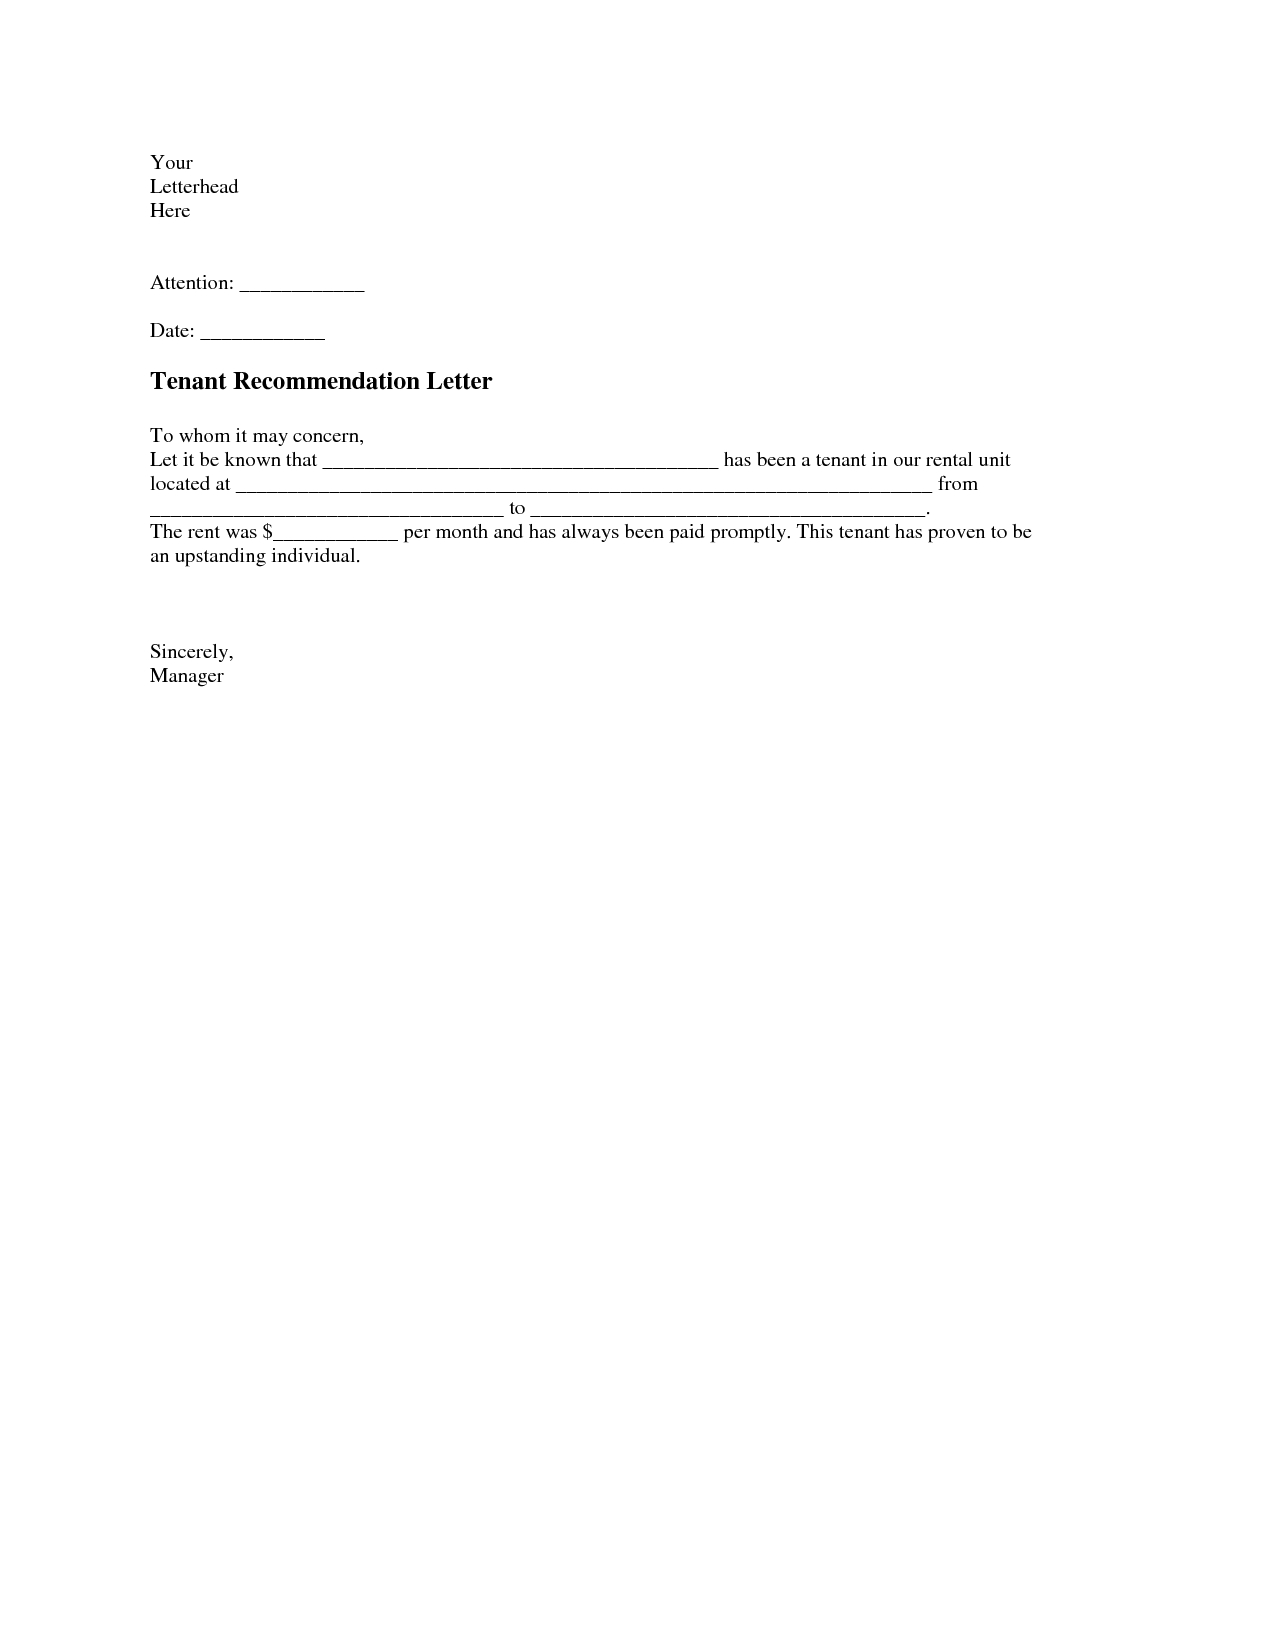 Tenant Recommendation Letter A Tenant Recommendation with regard to dimensions 1275 X 1650